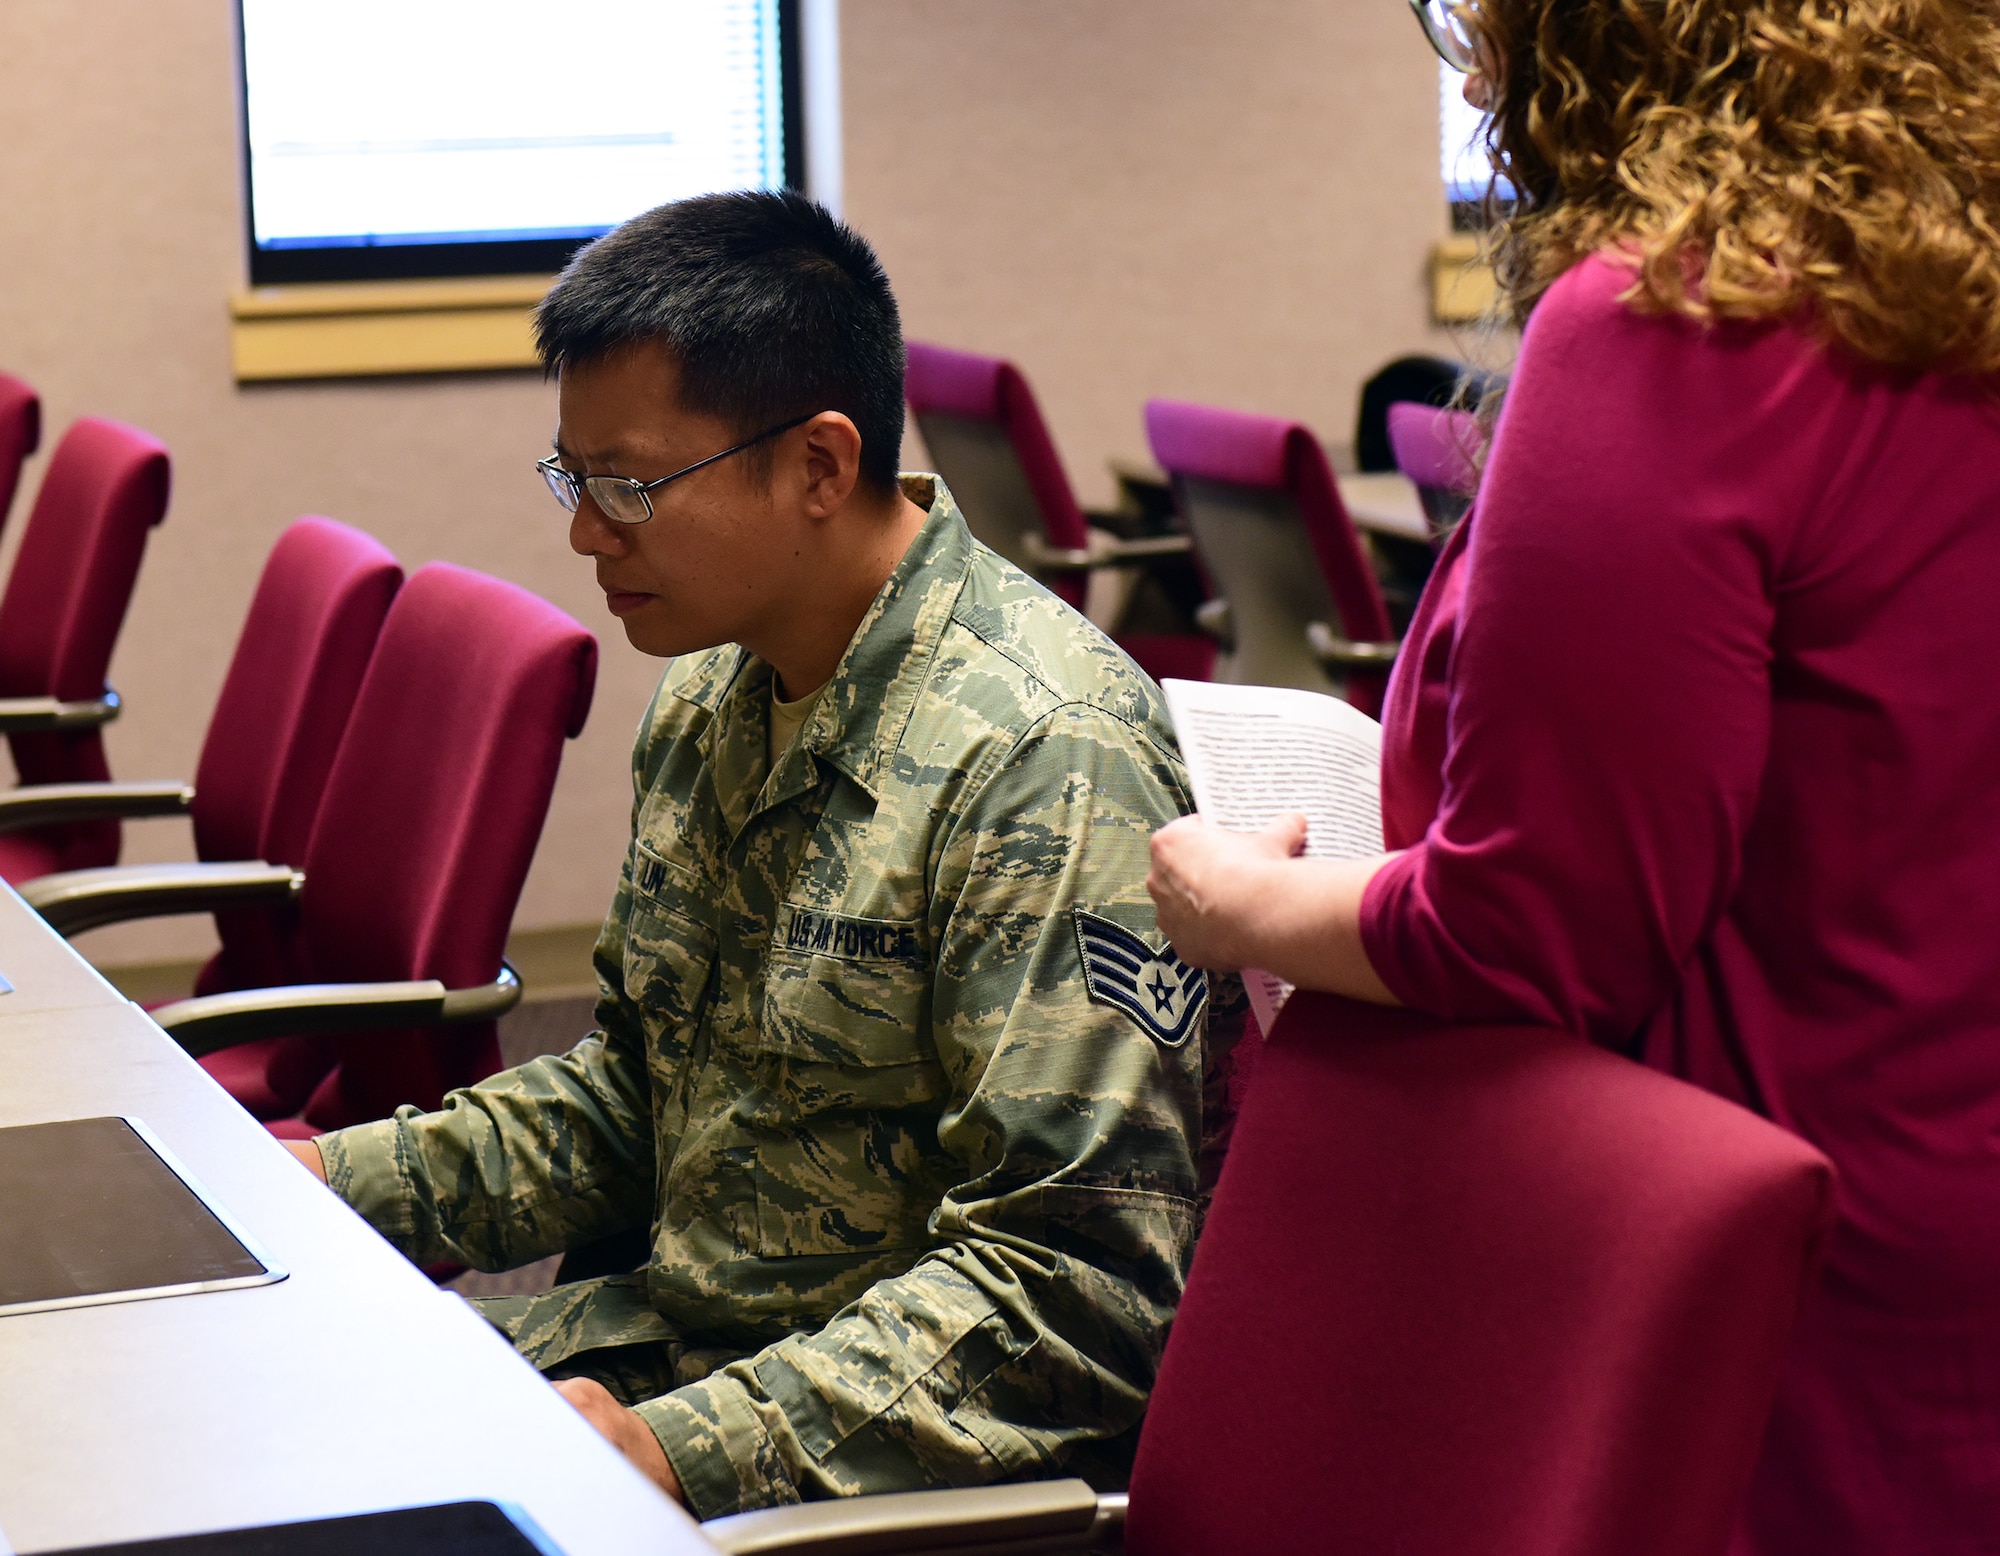 U.S. Air Force Staff Sgt. Alan Lin, a flight kitchen manager assigned to the 509th Force Support Squadron, listens to test instructions before taking the Defense Language Proficiency Test for Mandarin Chinese at Whiteman Air Force Base, Missouri, June 19, 2018. All ranks from all military branches and civilians may take the DLPT, which offers tests for more than 60 languages.